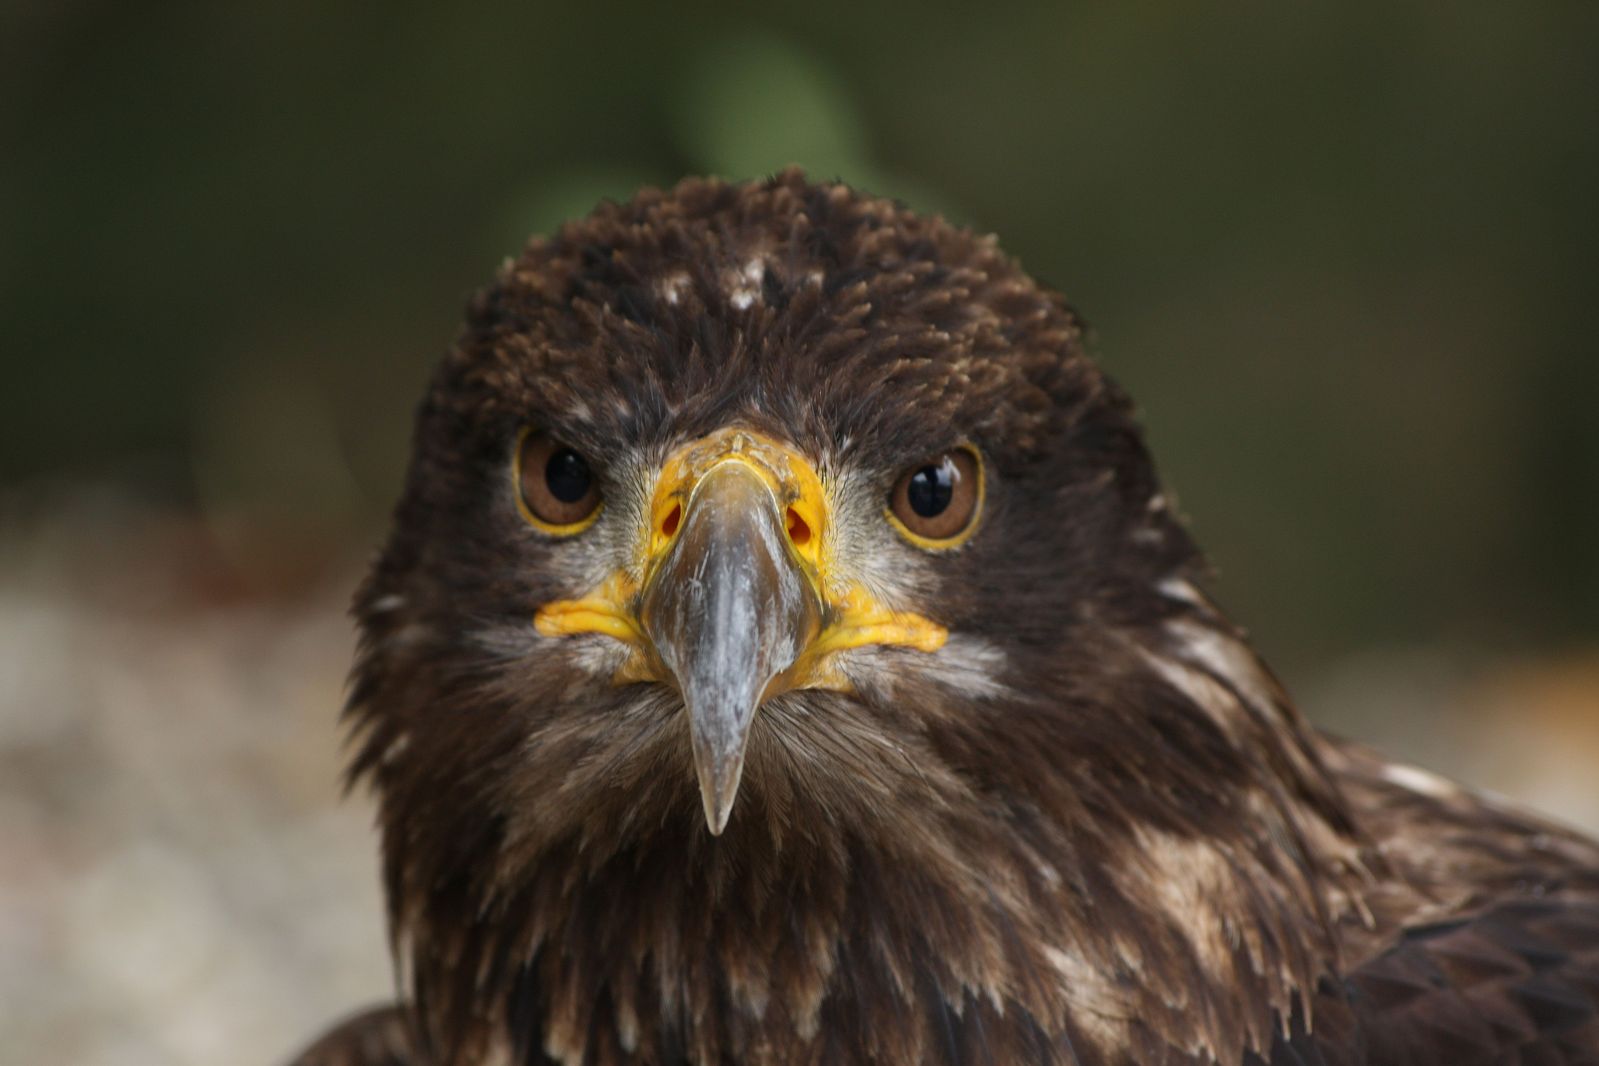 an eagle is shown in close up for a po